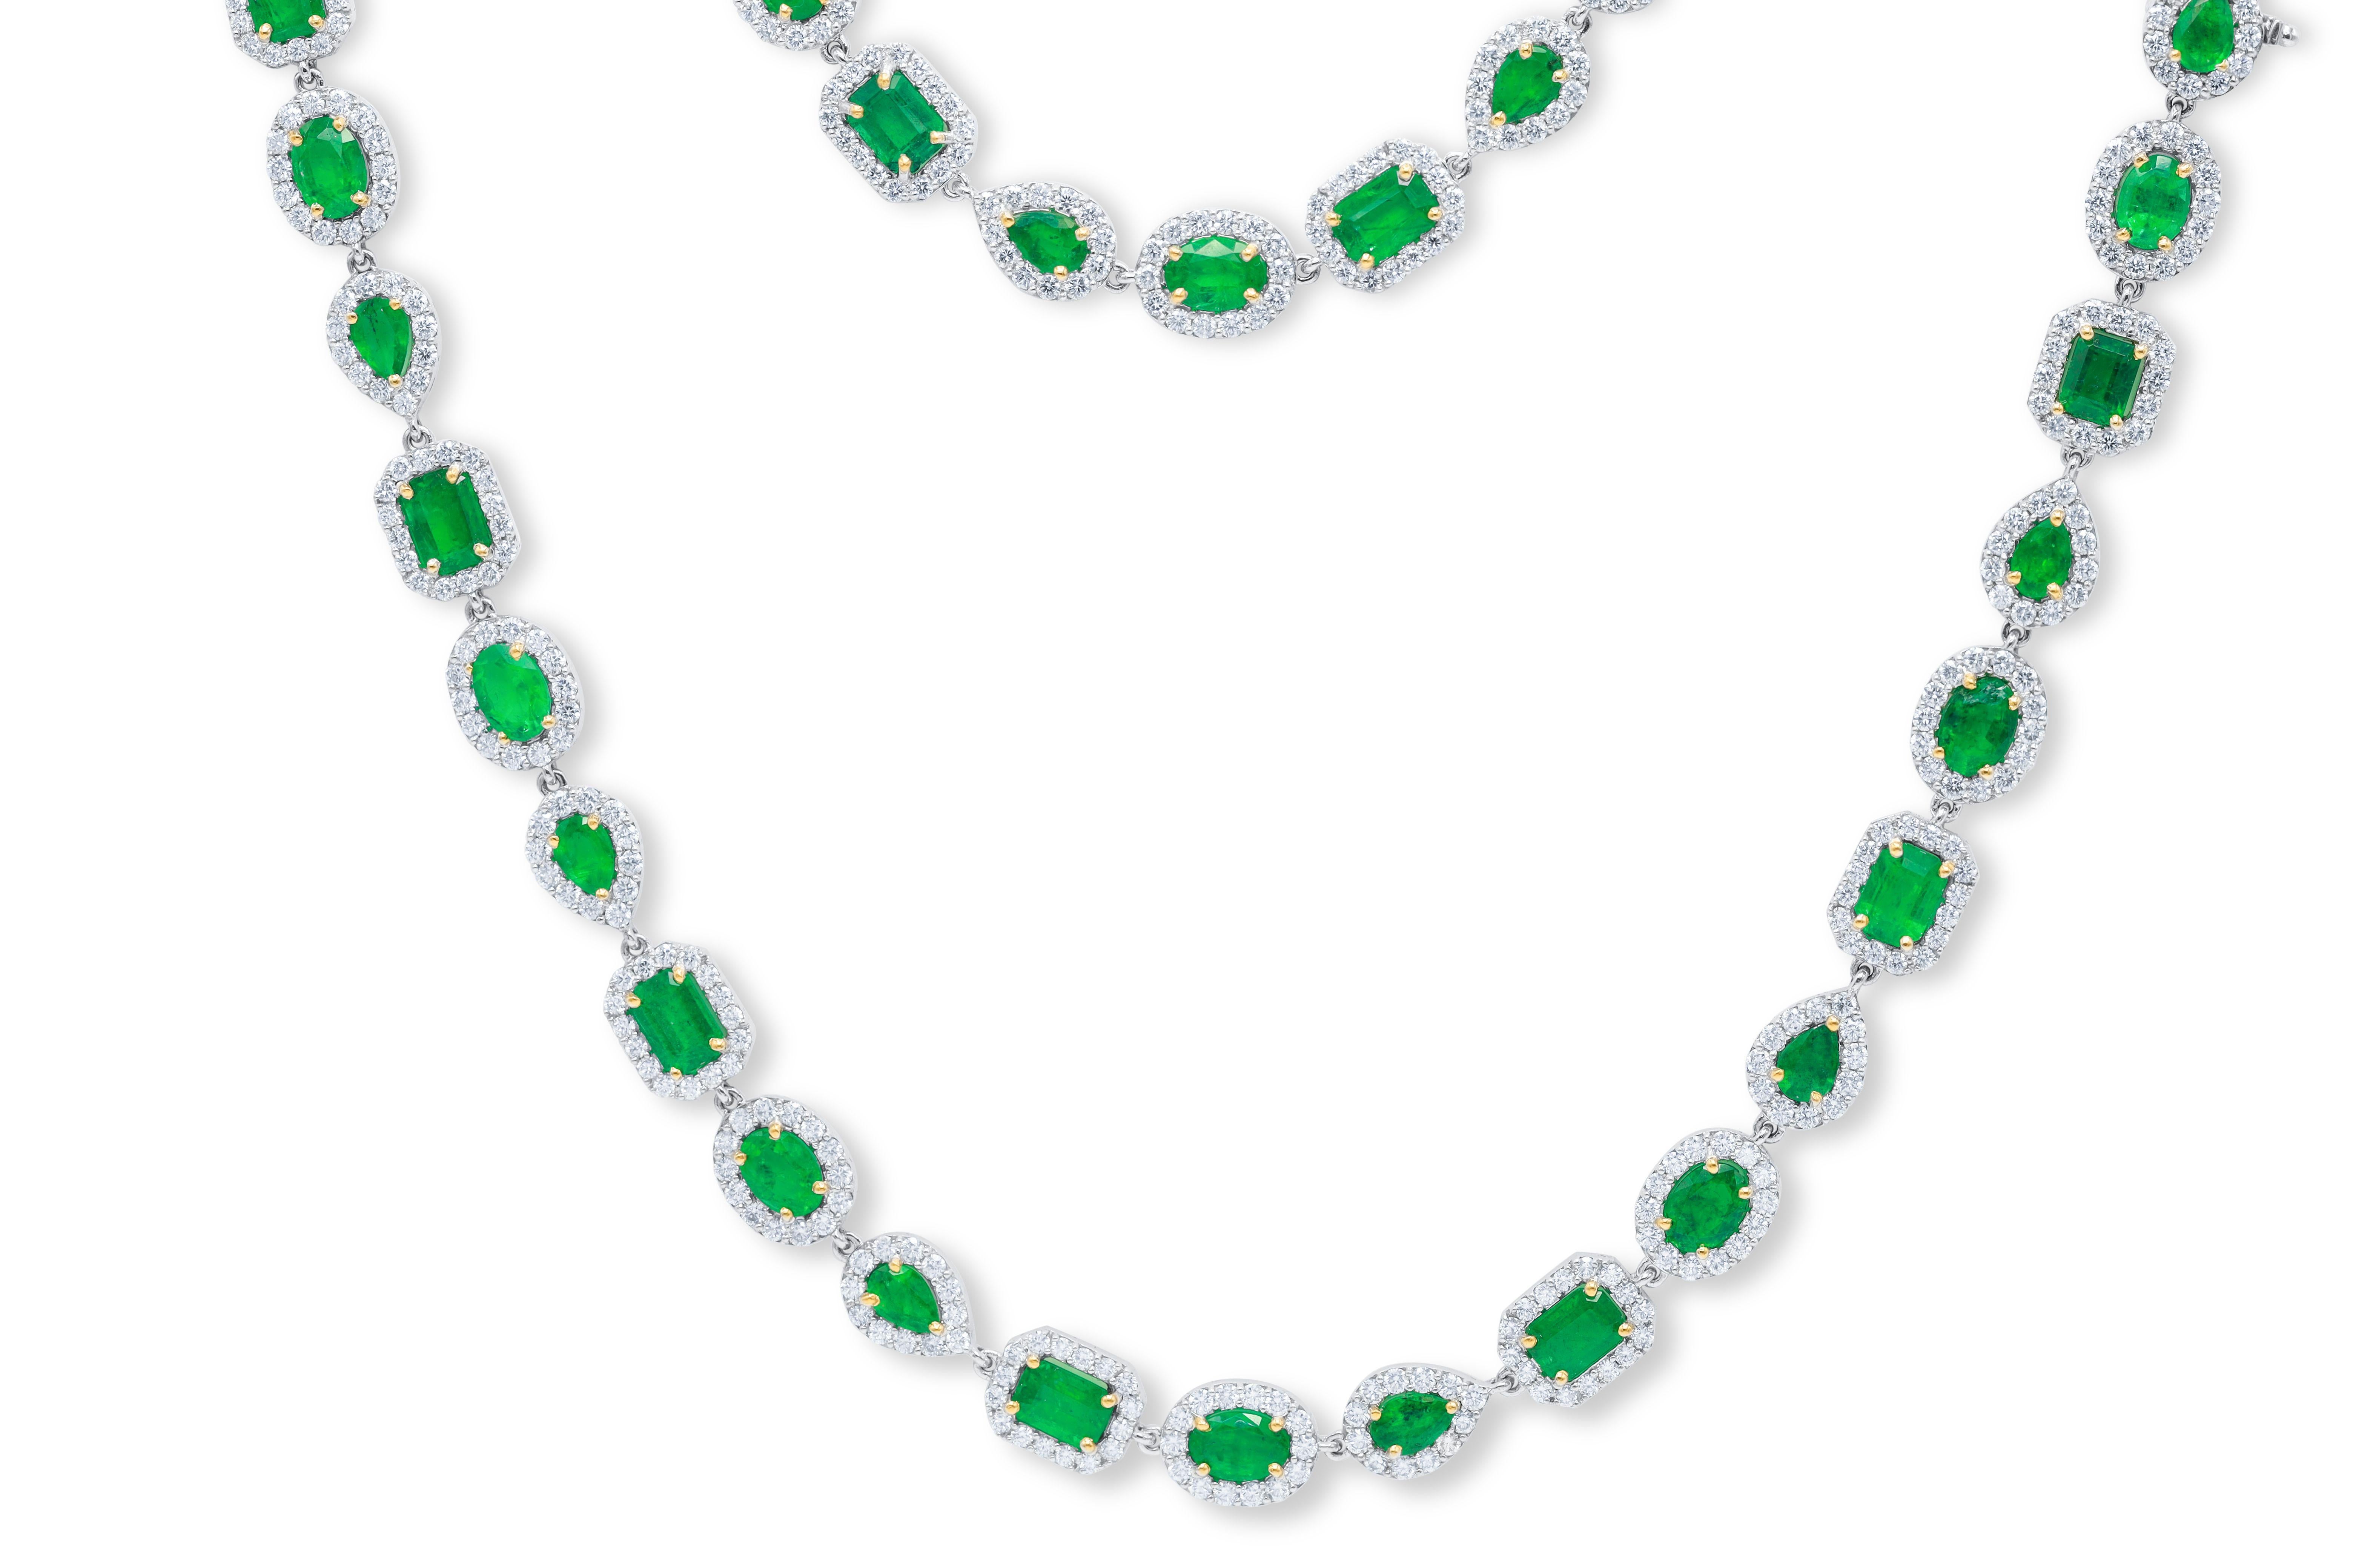 Diana M. Mixed Shape 46.10 Carat Emerald and Diamond Halo Necklace In New Condition For Sale In New York, NY